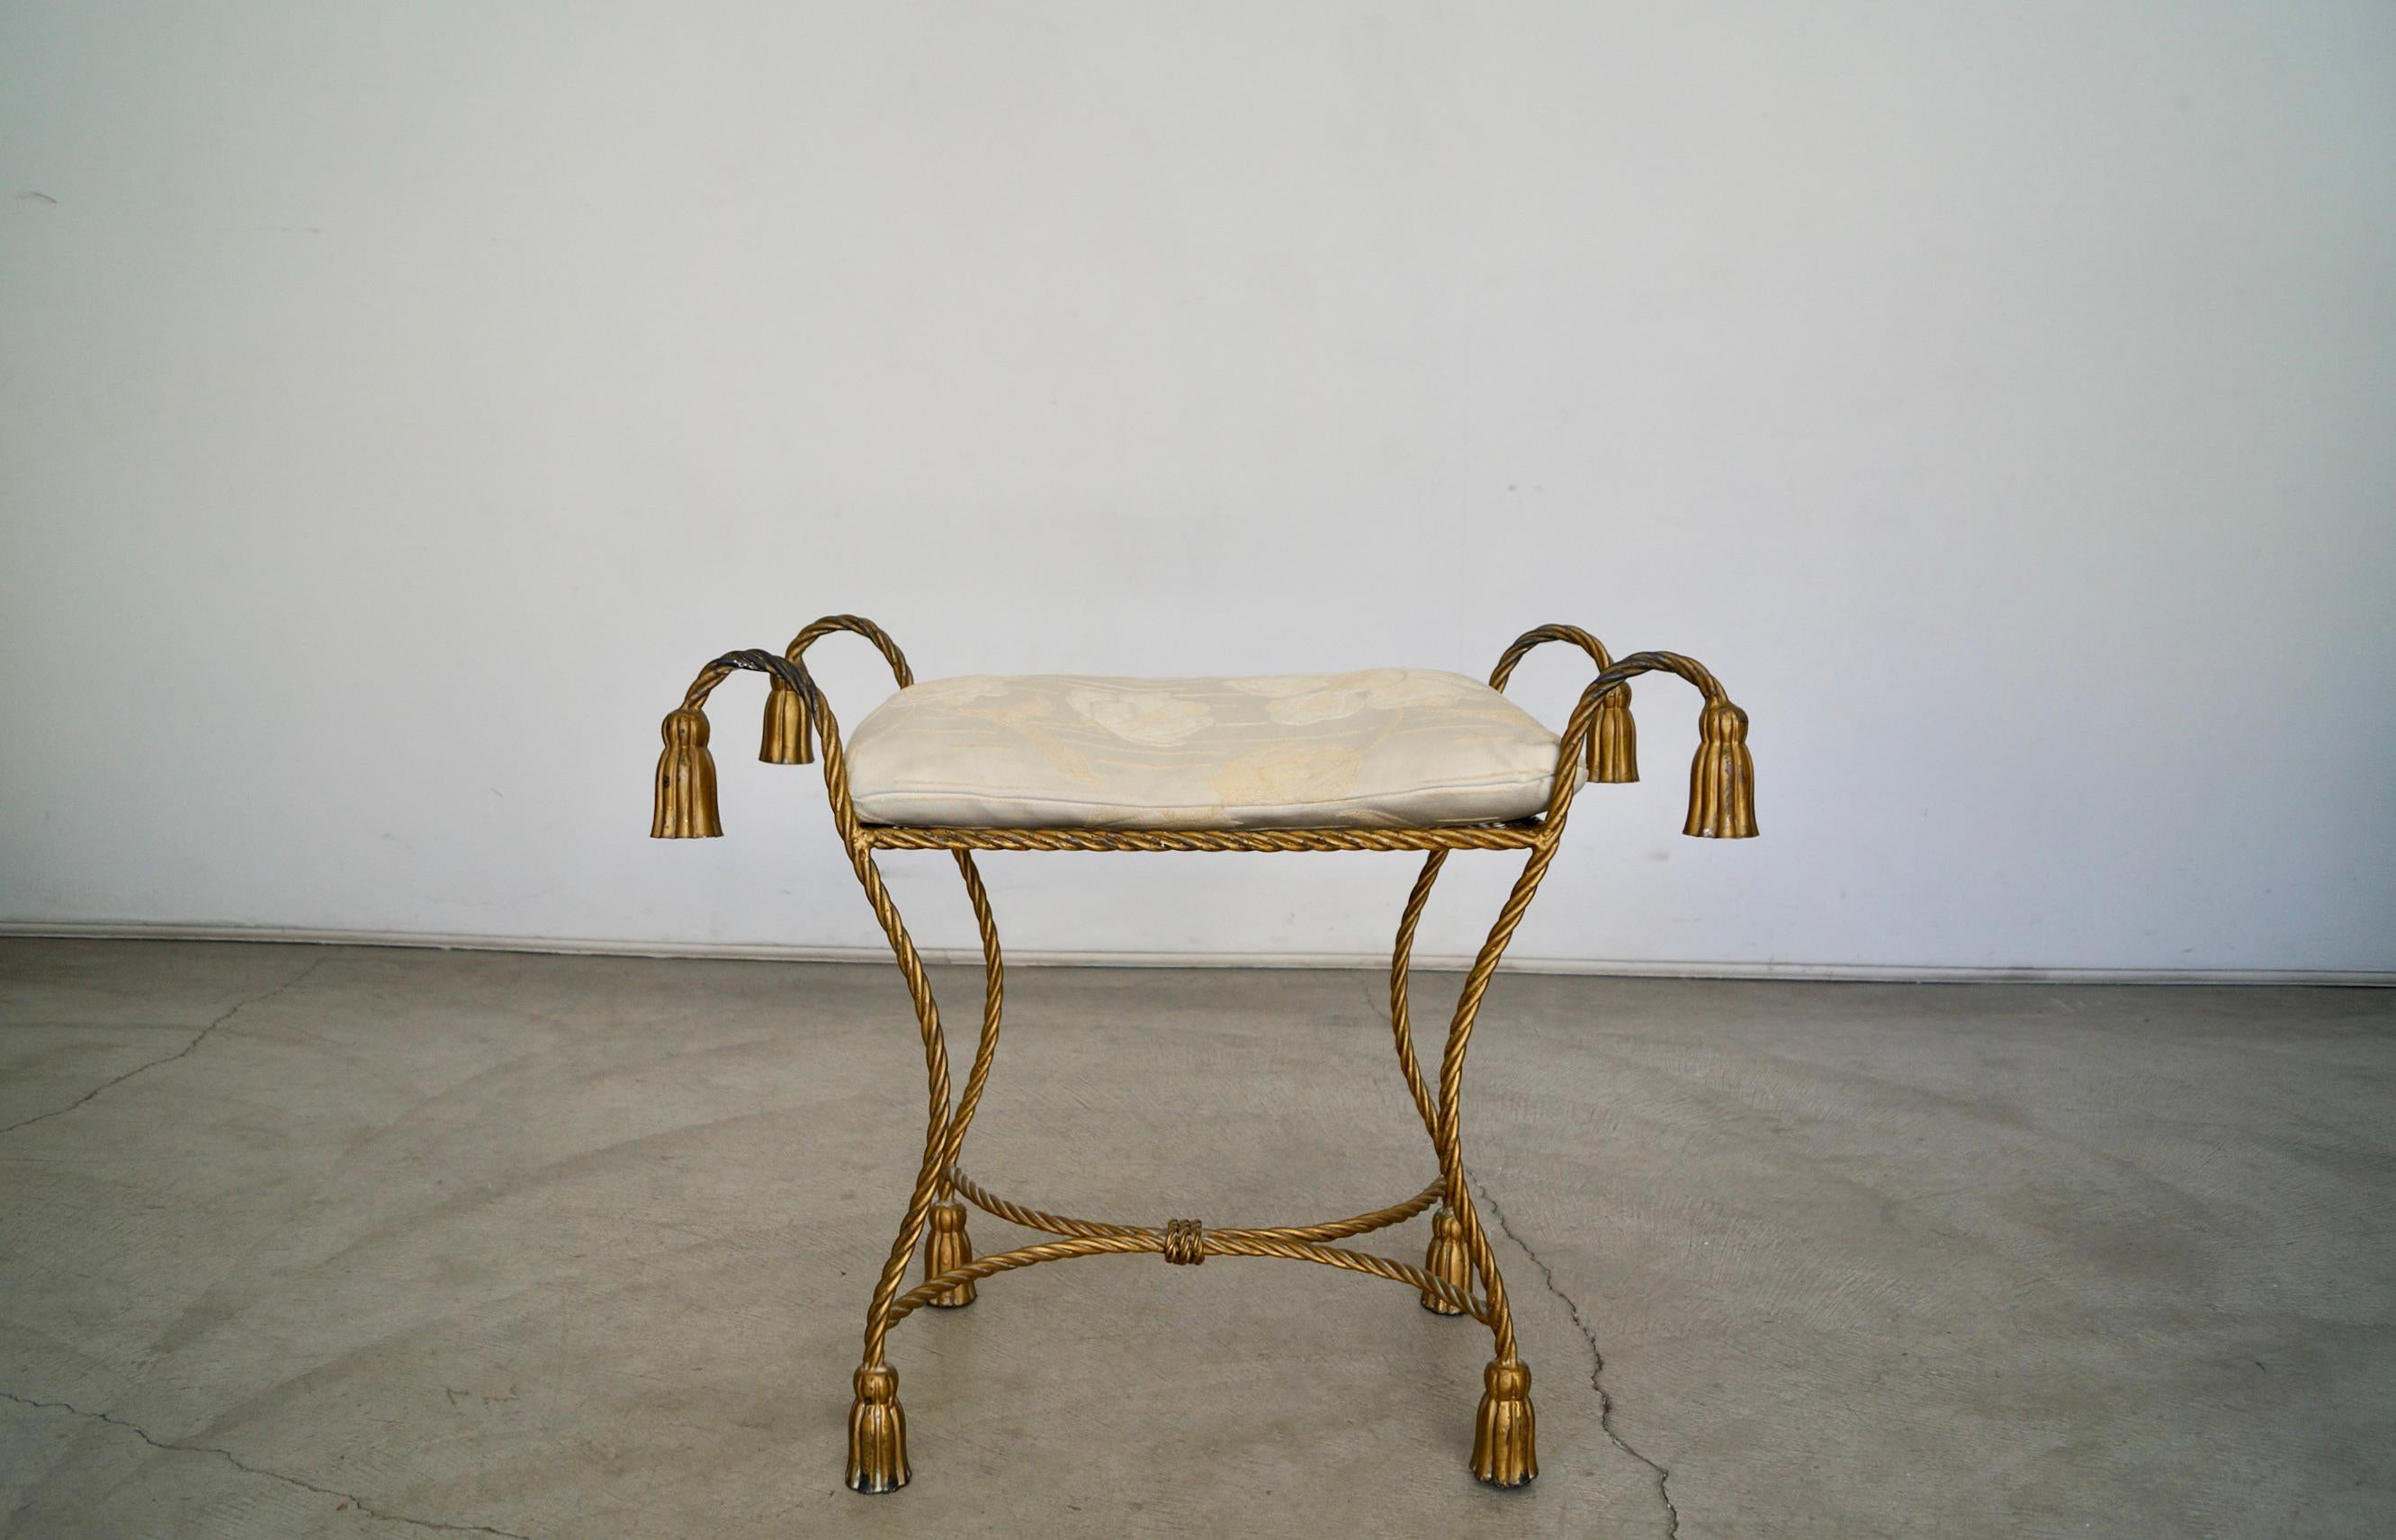 Vintage 1950s Hollywood Regency vanity stool bench for sale. Made of metal with a gold aged brass finish and beautiful patina. Tassel rope design with tassel rope legs. Wonderful metal work with great texture. Has a loose cushion in excellent